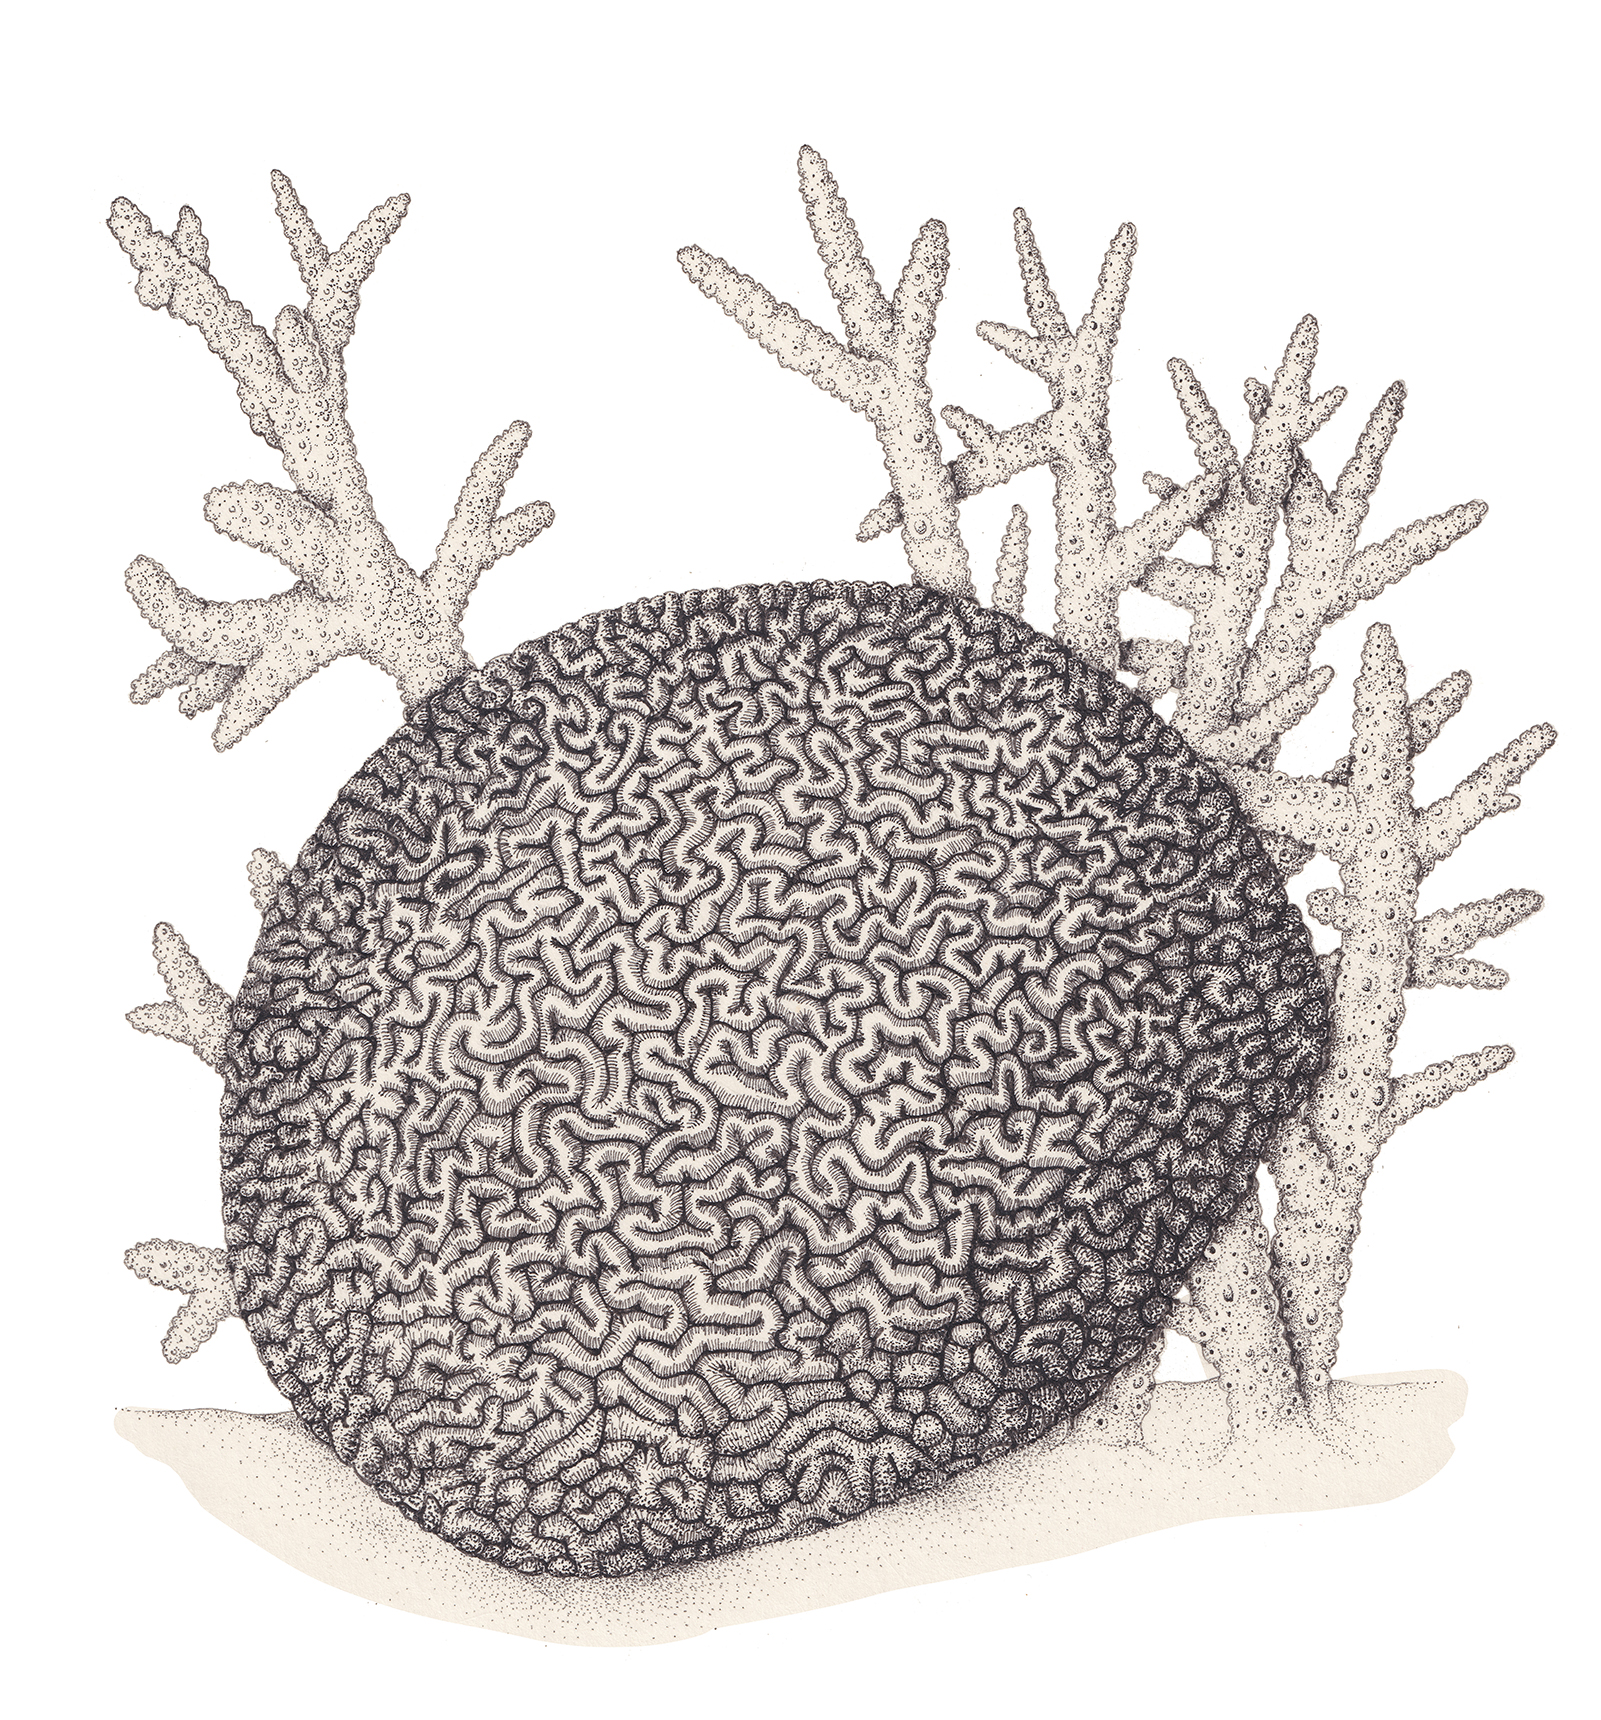 Staghorn Coral (Acropora cervicornis) Dimensions & Drawings